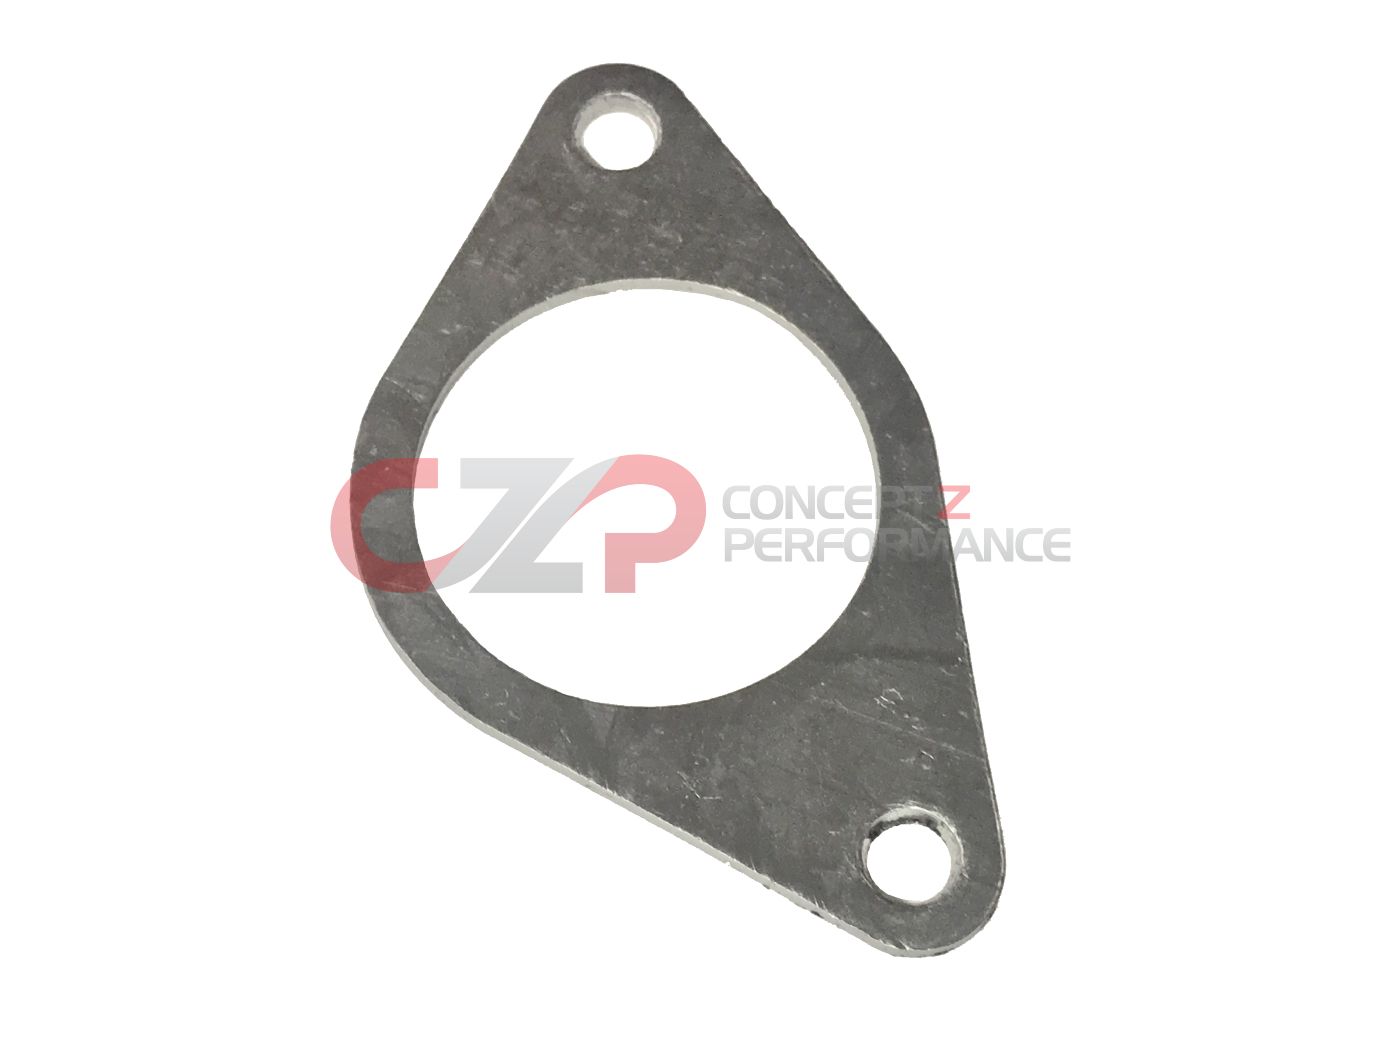 CZP XT eXtra Thick Exhaust Gasket, LH - Pre-Cat / Downpipe to Catalytic Converter / Test Pipe -  Infiniti Q50 Q60 3.0T VR30DDTT